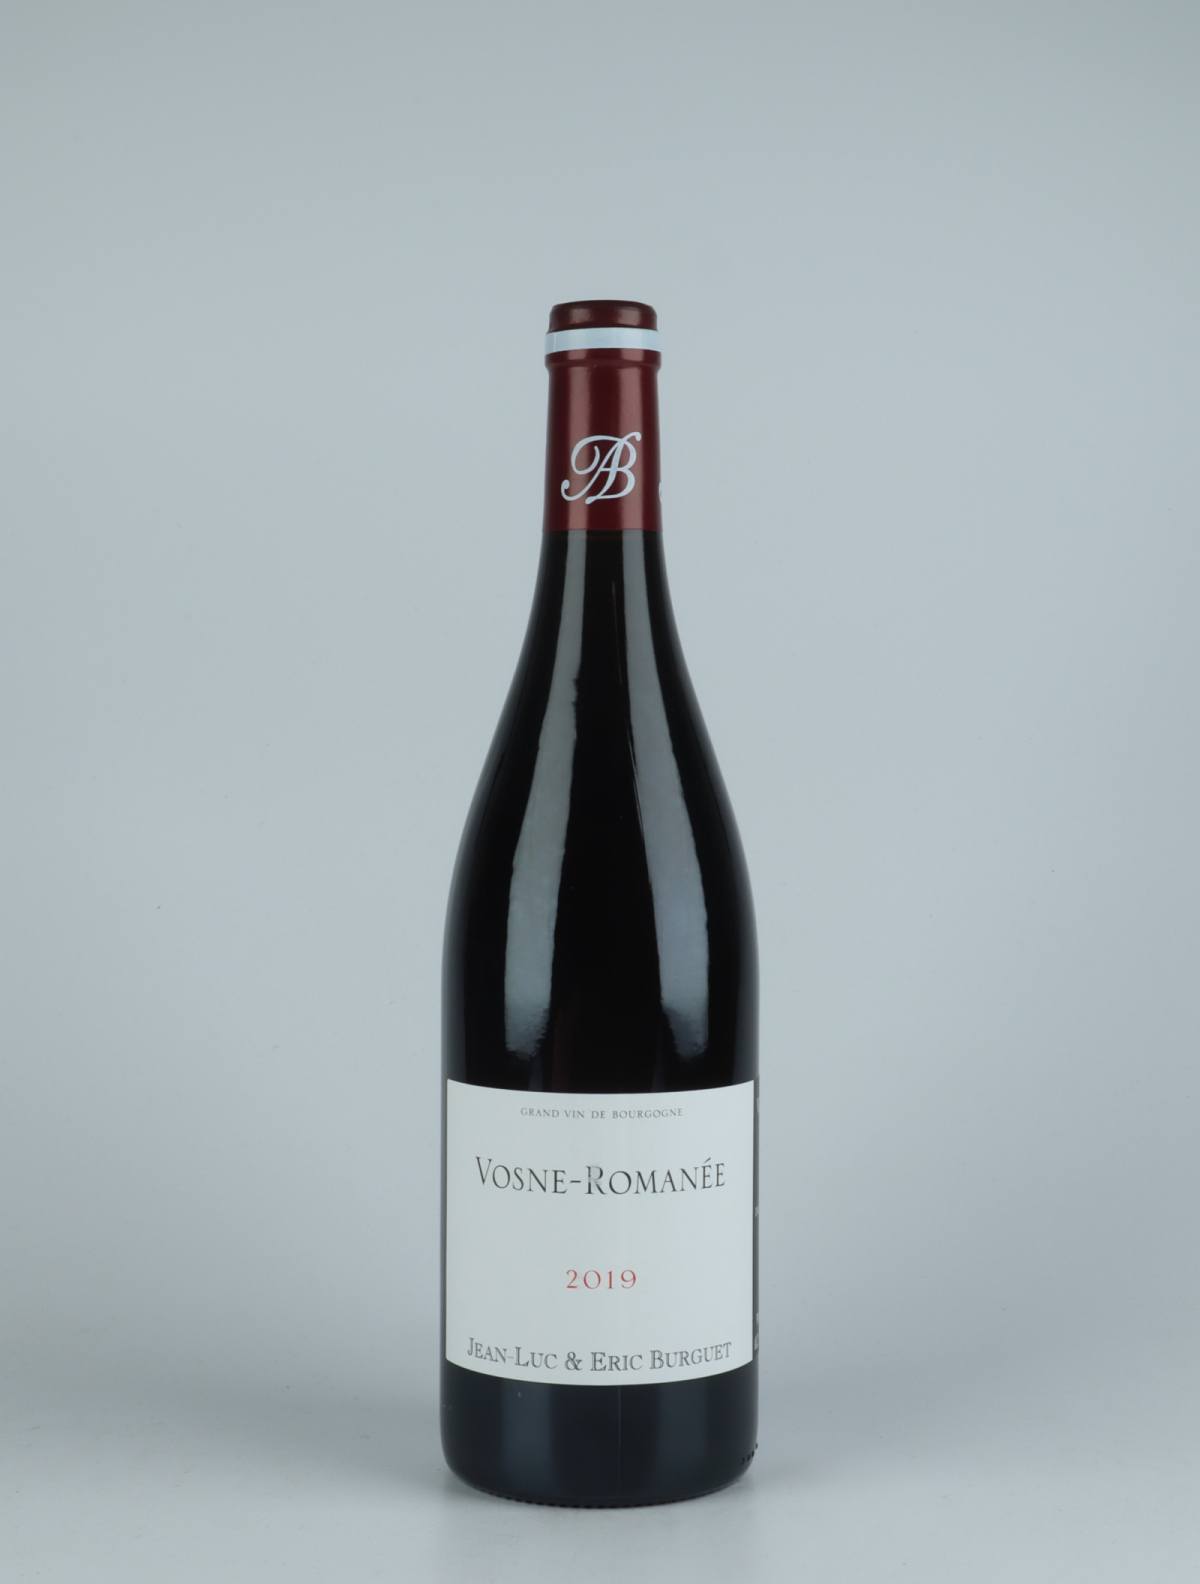 A bottle 2019 Vosne-Romanée Red wine from Jean-Luc & Eric Burguet, Burgundy in France